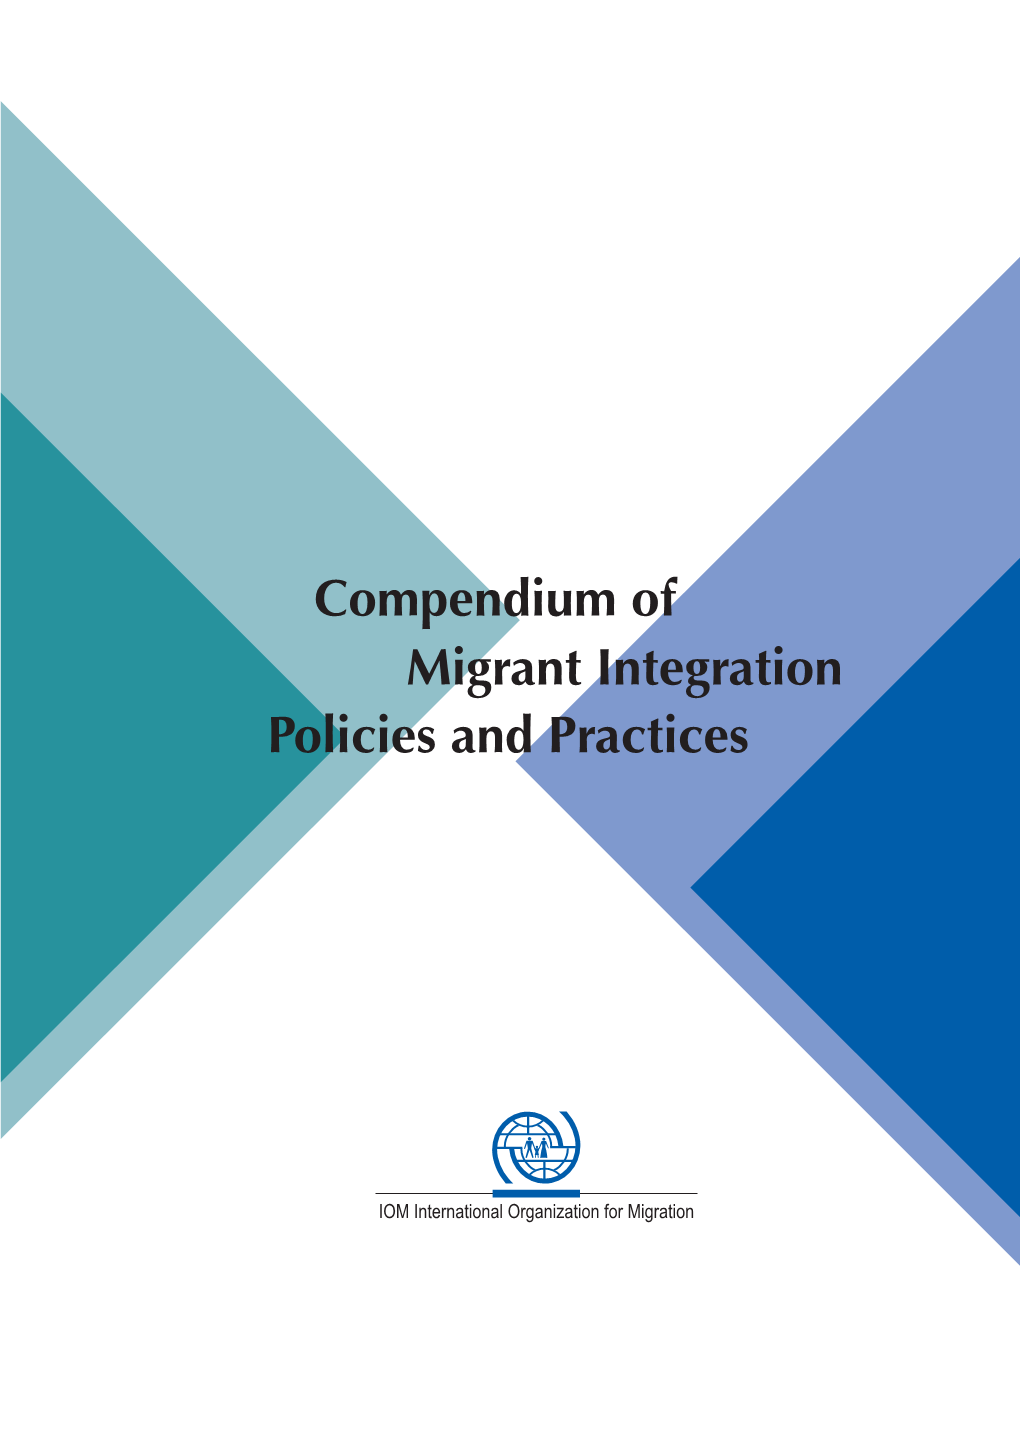 Compendium of Migrant Integration Policies and Practices Foreword